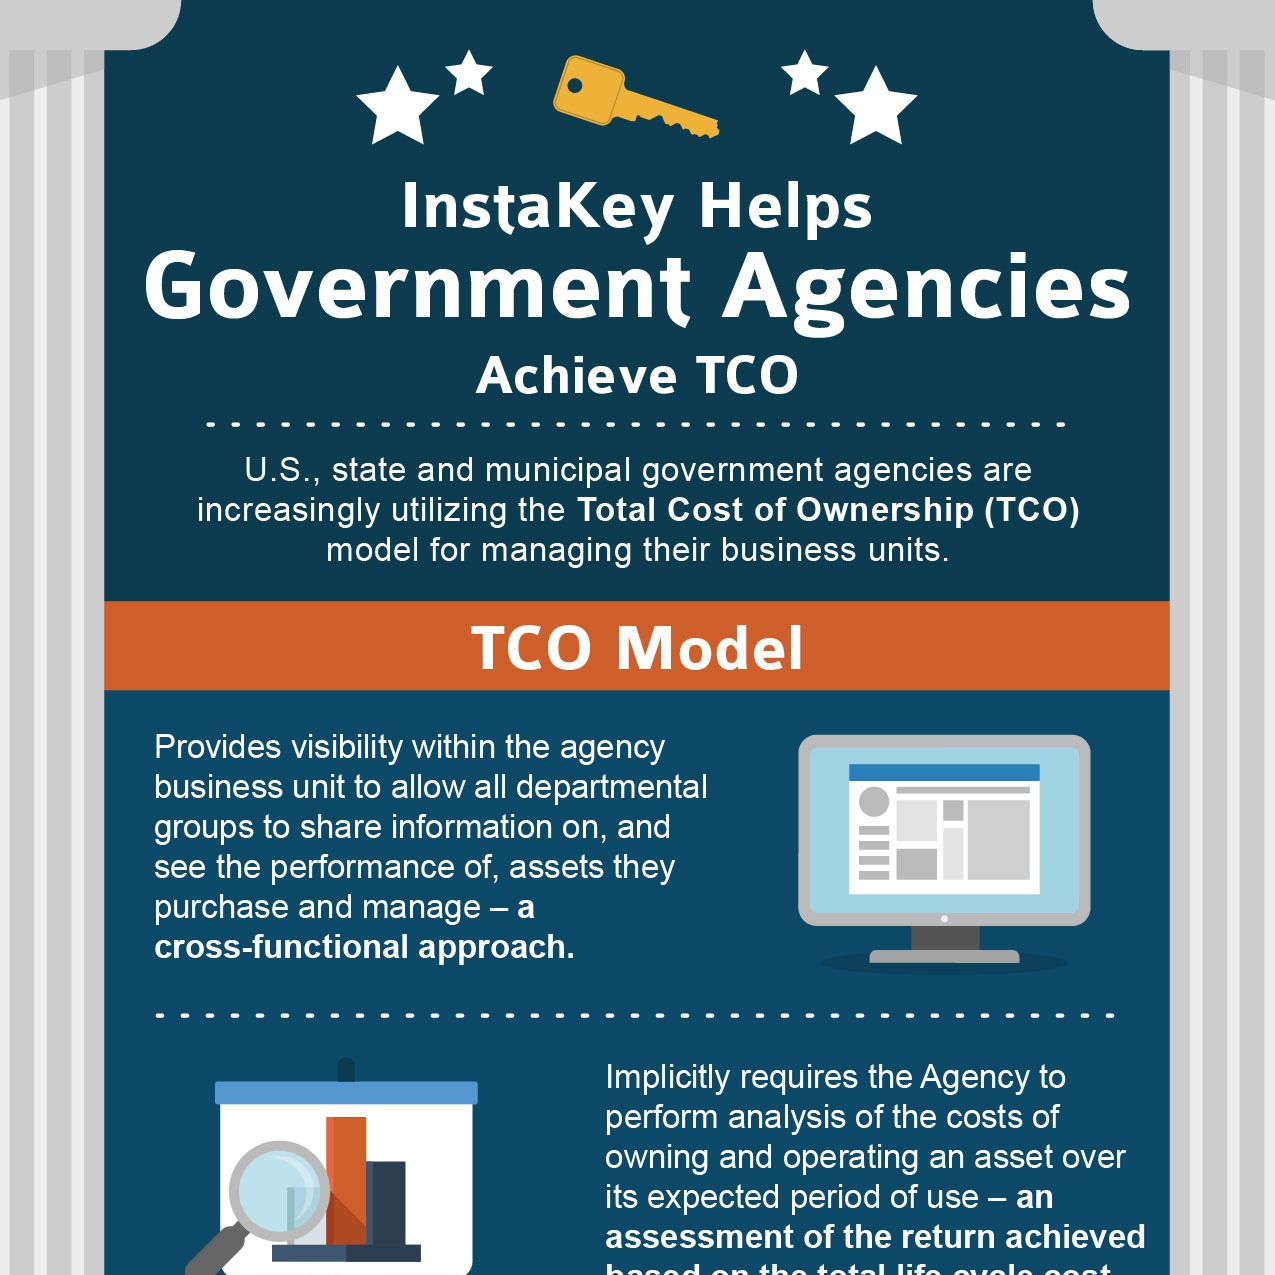 InstaKey Helps Government Agencies Achieve Total Cost of Ownership